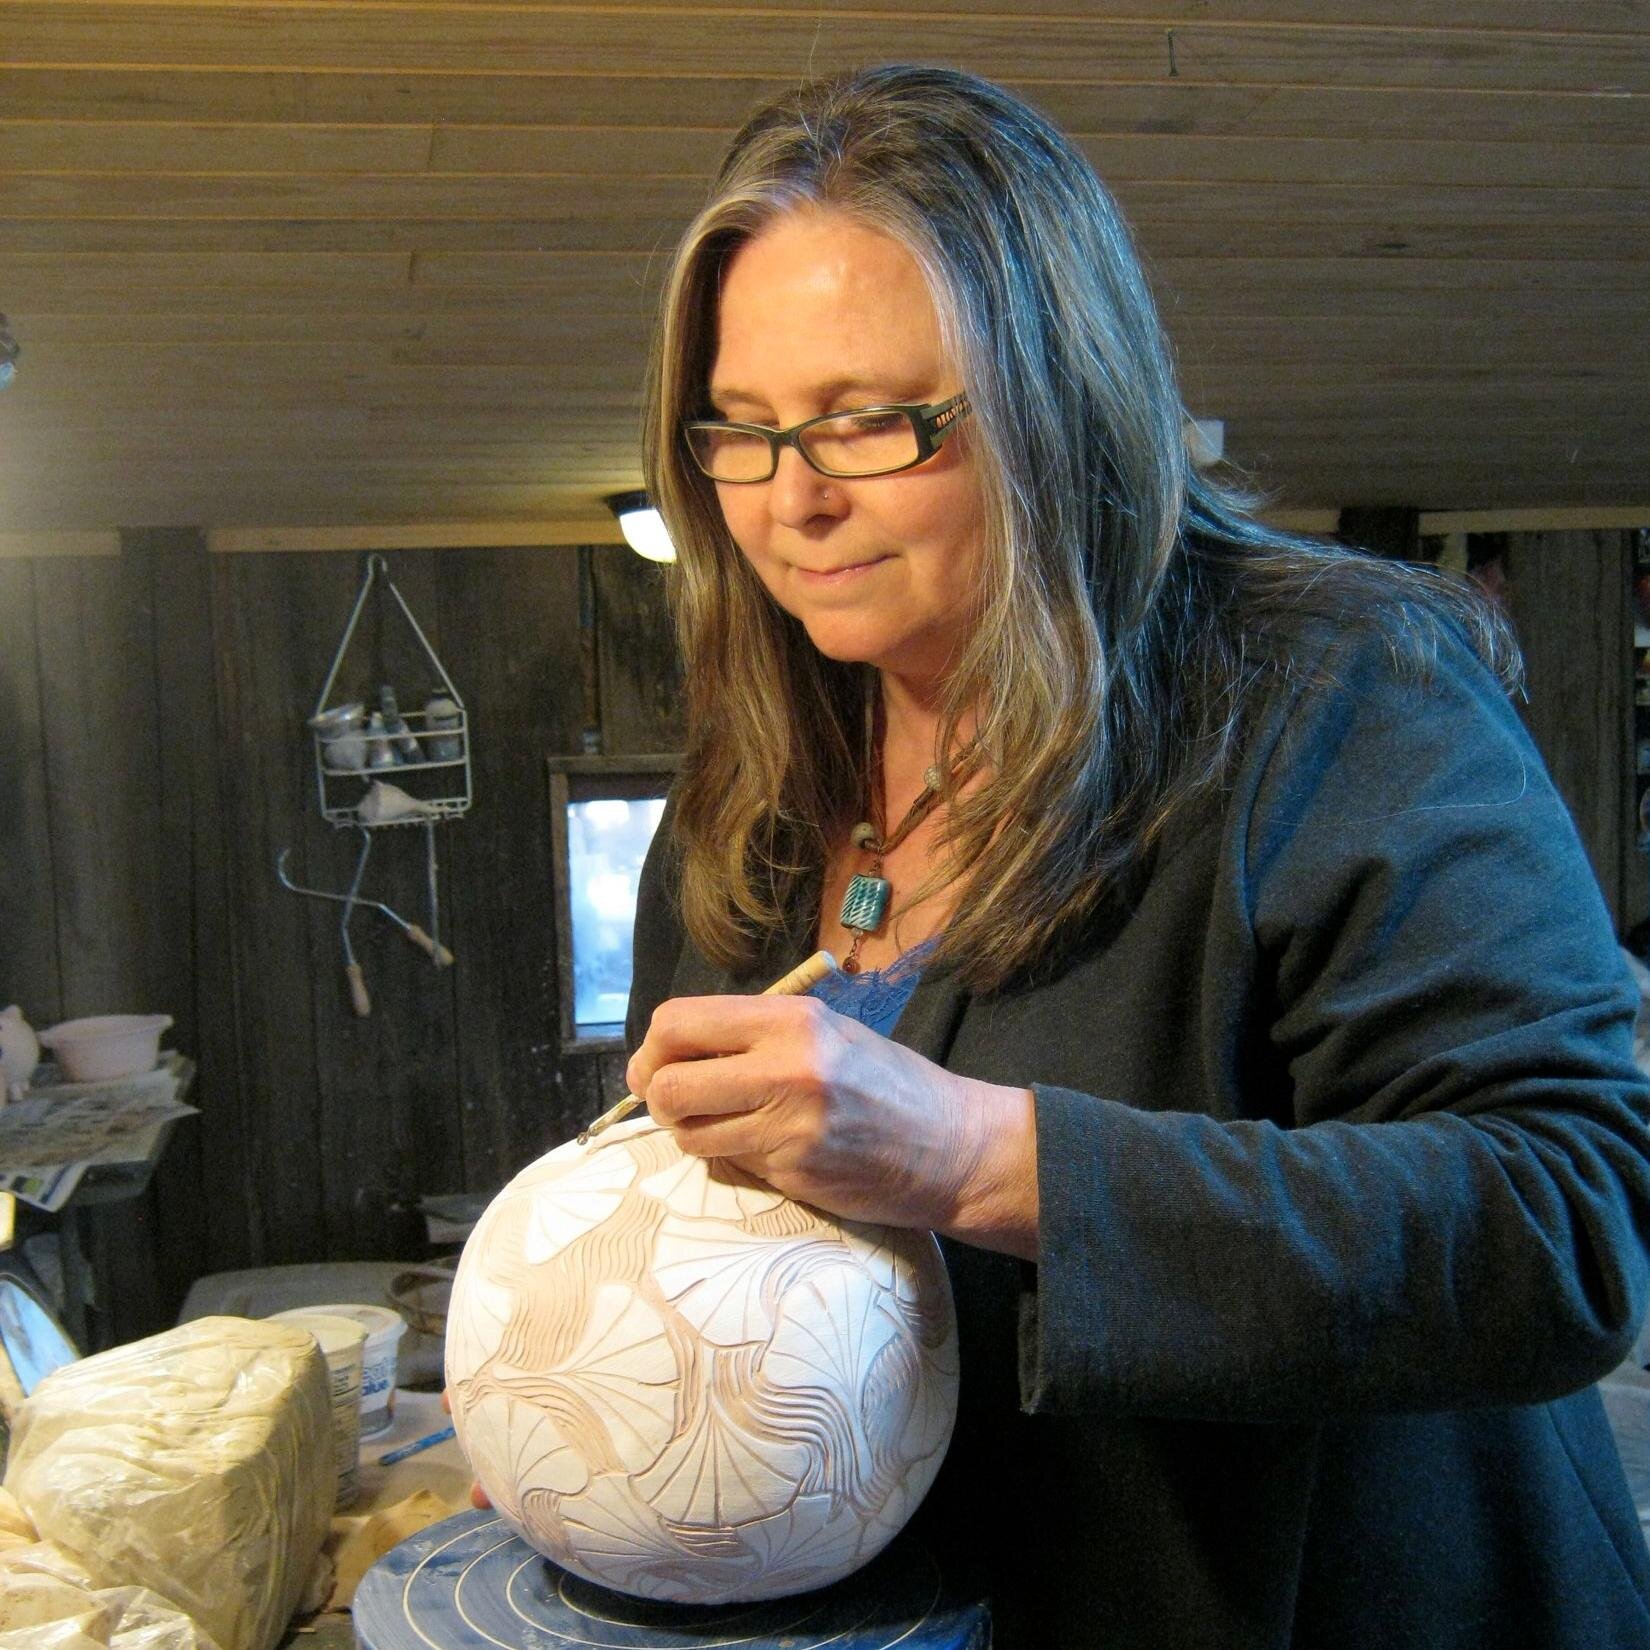 i am a full time studio potter living and working on the pottery highway in Seagrove, NC